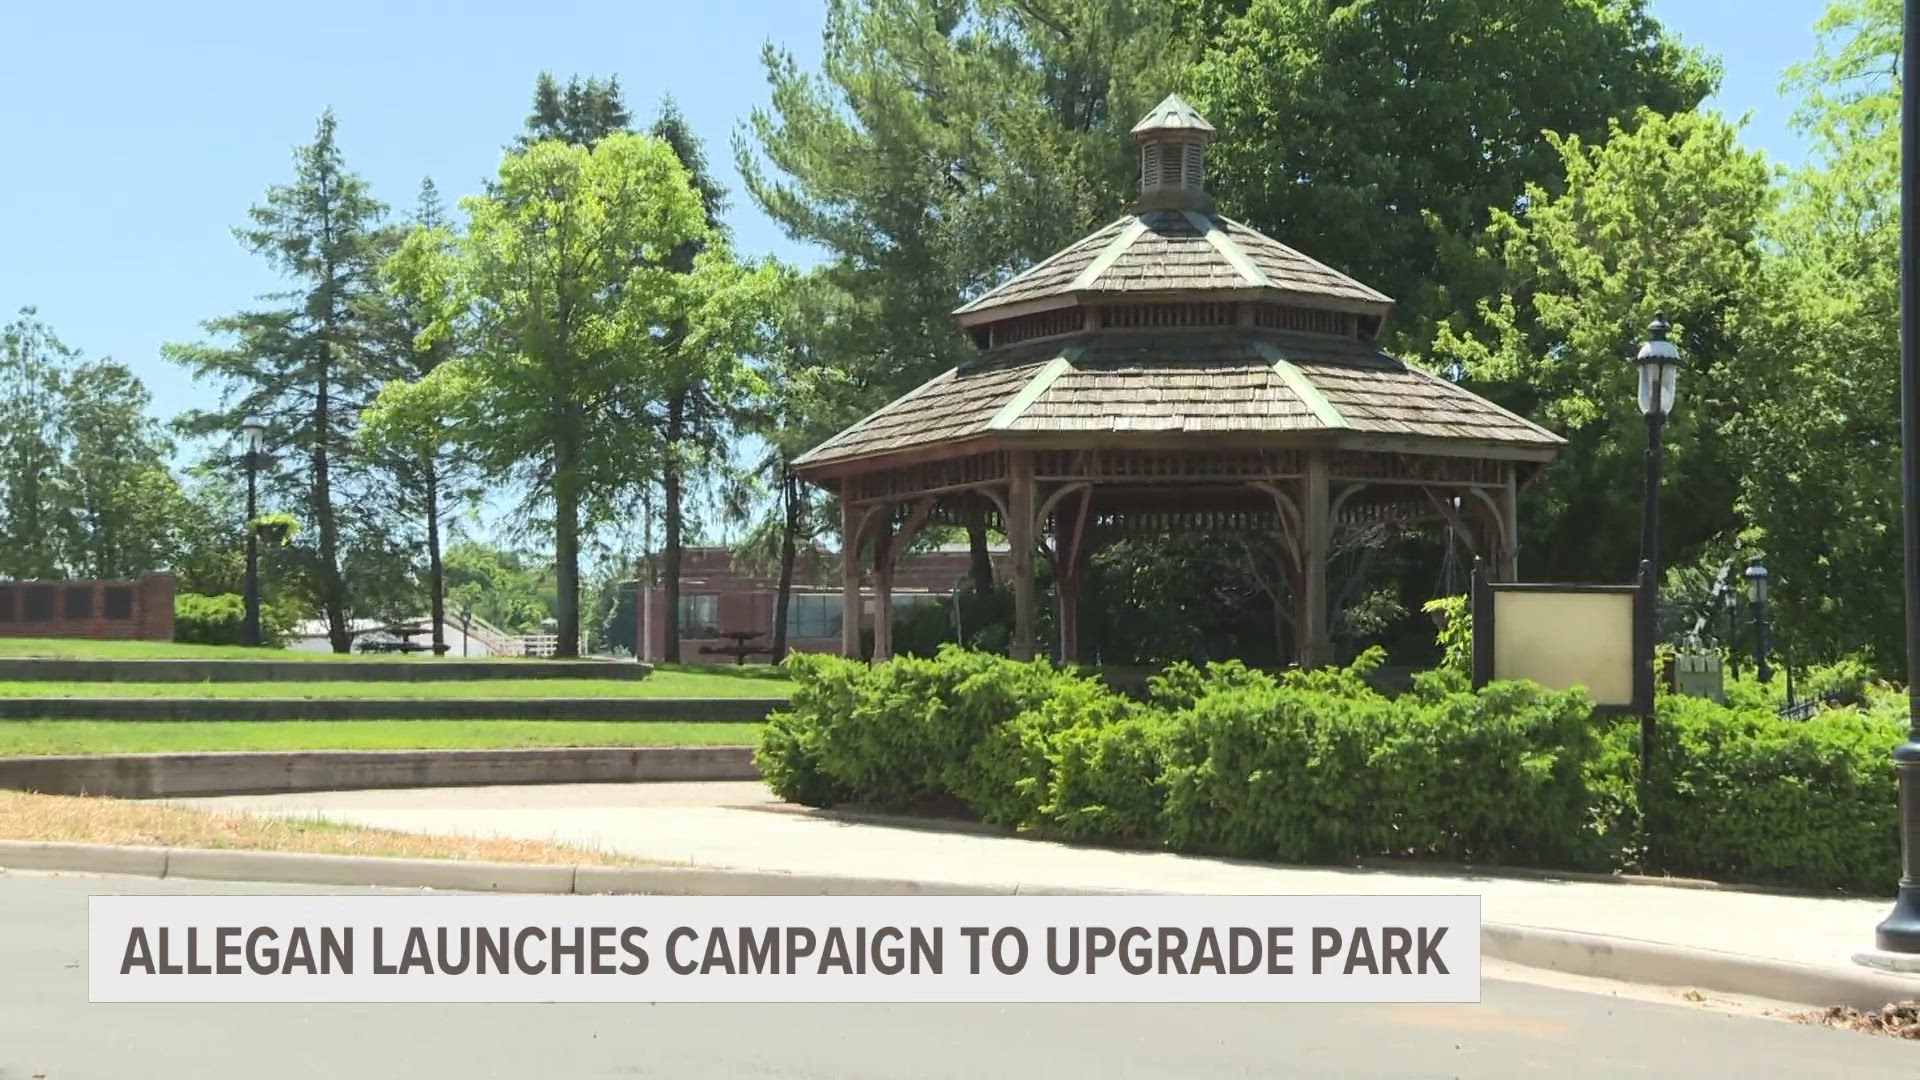 With the money, the city wants to renovate the park, create a universally accessible pedestrian plaza and improve the existing infrastructure.